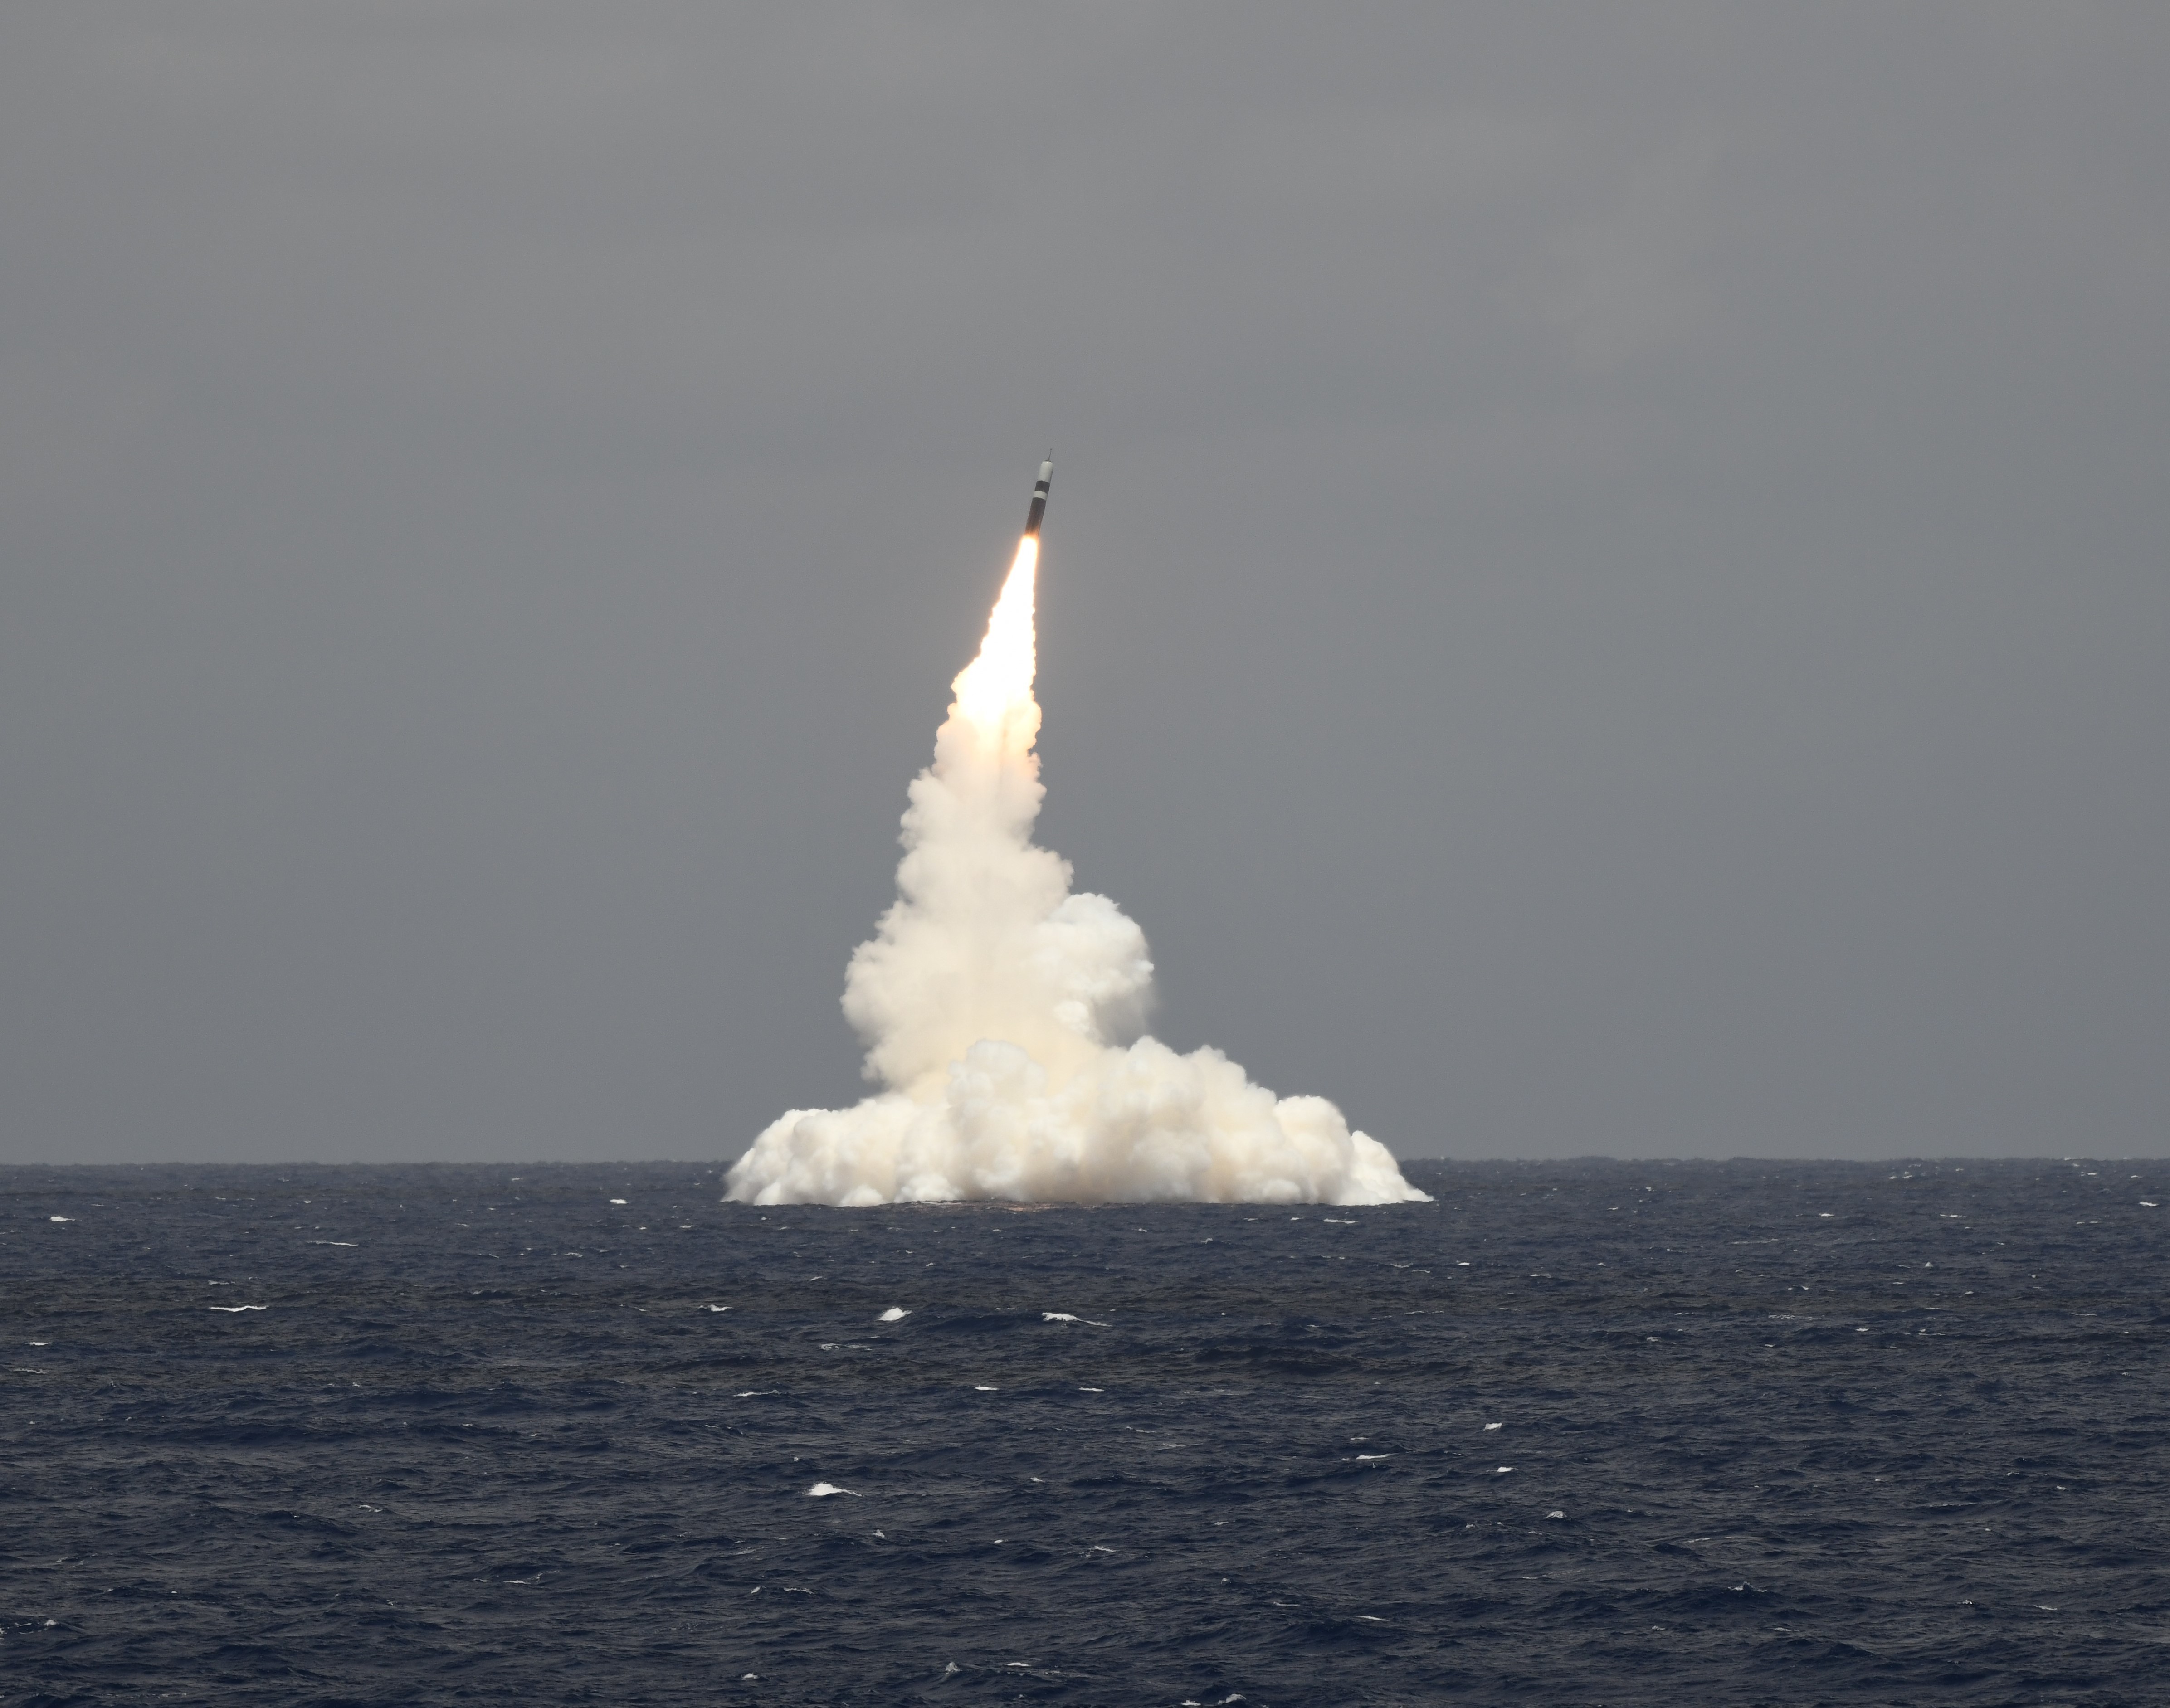 ATLANTIC OCEAN (May 9, 2019) An unarmed Trident II D5 missile launches from the Ohio-class ballistic missile submarine USS Rhode Island (SSBN 740) off the coast of Cape Canaveral, Florida, May 9, 2019. The test launch was part of the U.S. Navy Strategic Systems Programs' demonstration and shakedown operation certification process. The successful launch certified the readiness of the SSBN crew and the operation performance of the submarine's strategic weapons
system following completion of its engineered refueling overhaul before
returning to operational availability. (U.S. Navy photo by John Kowalski/Released)